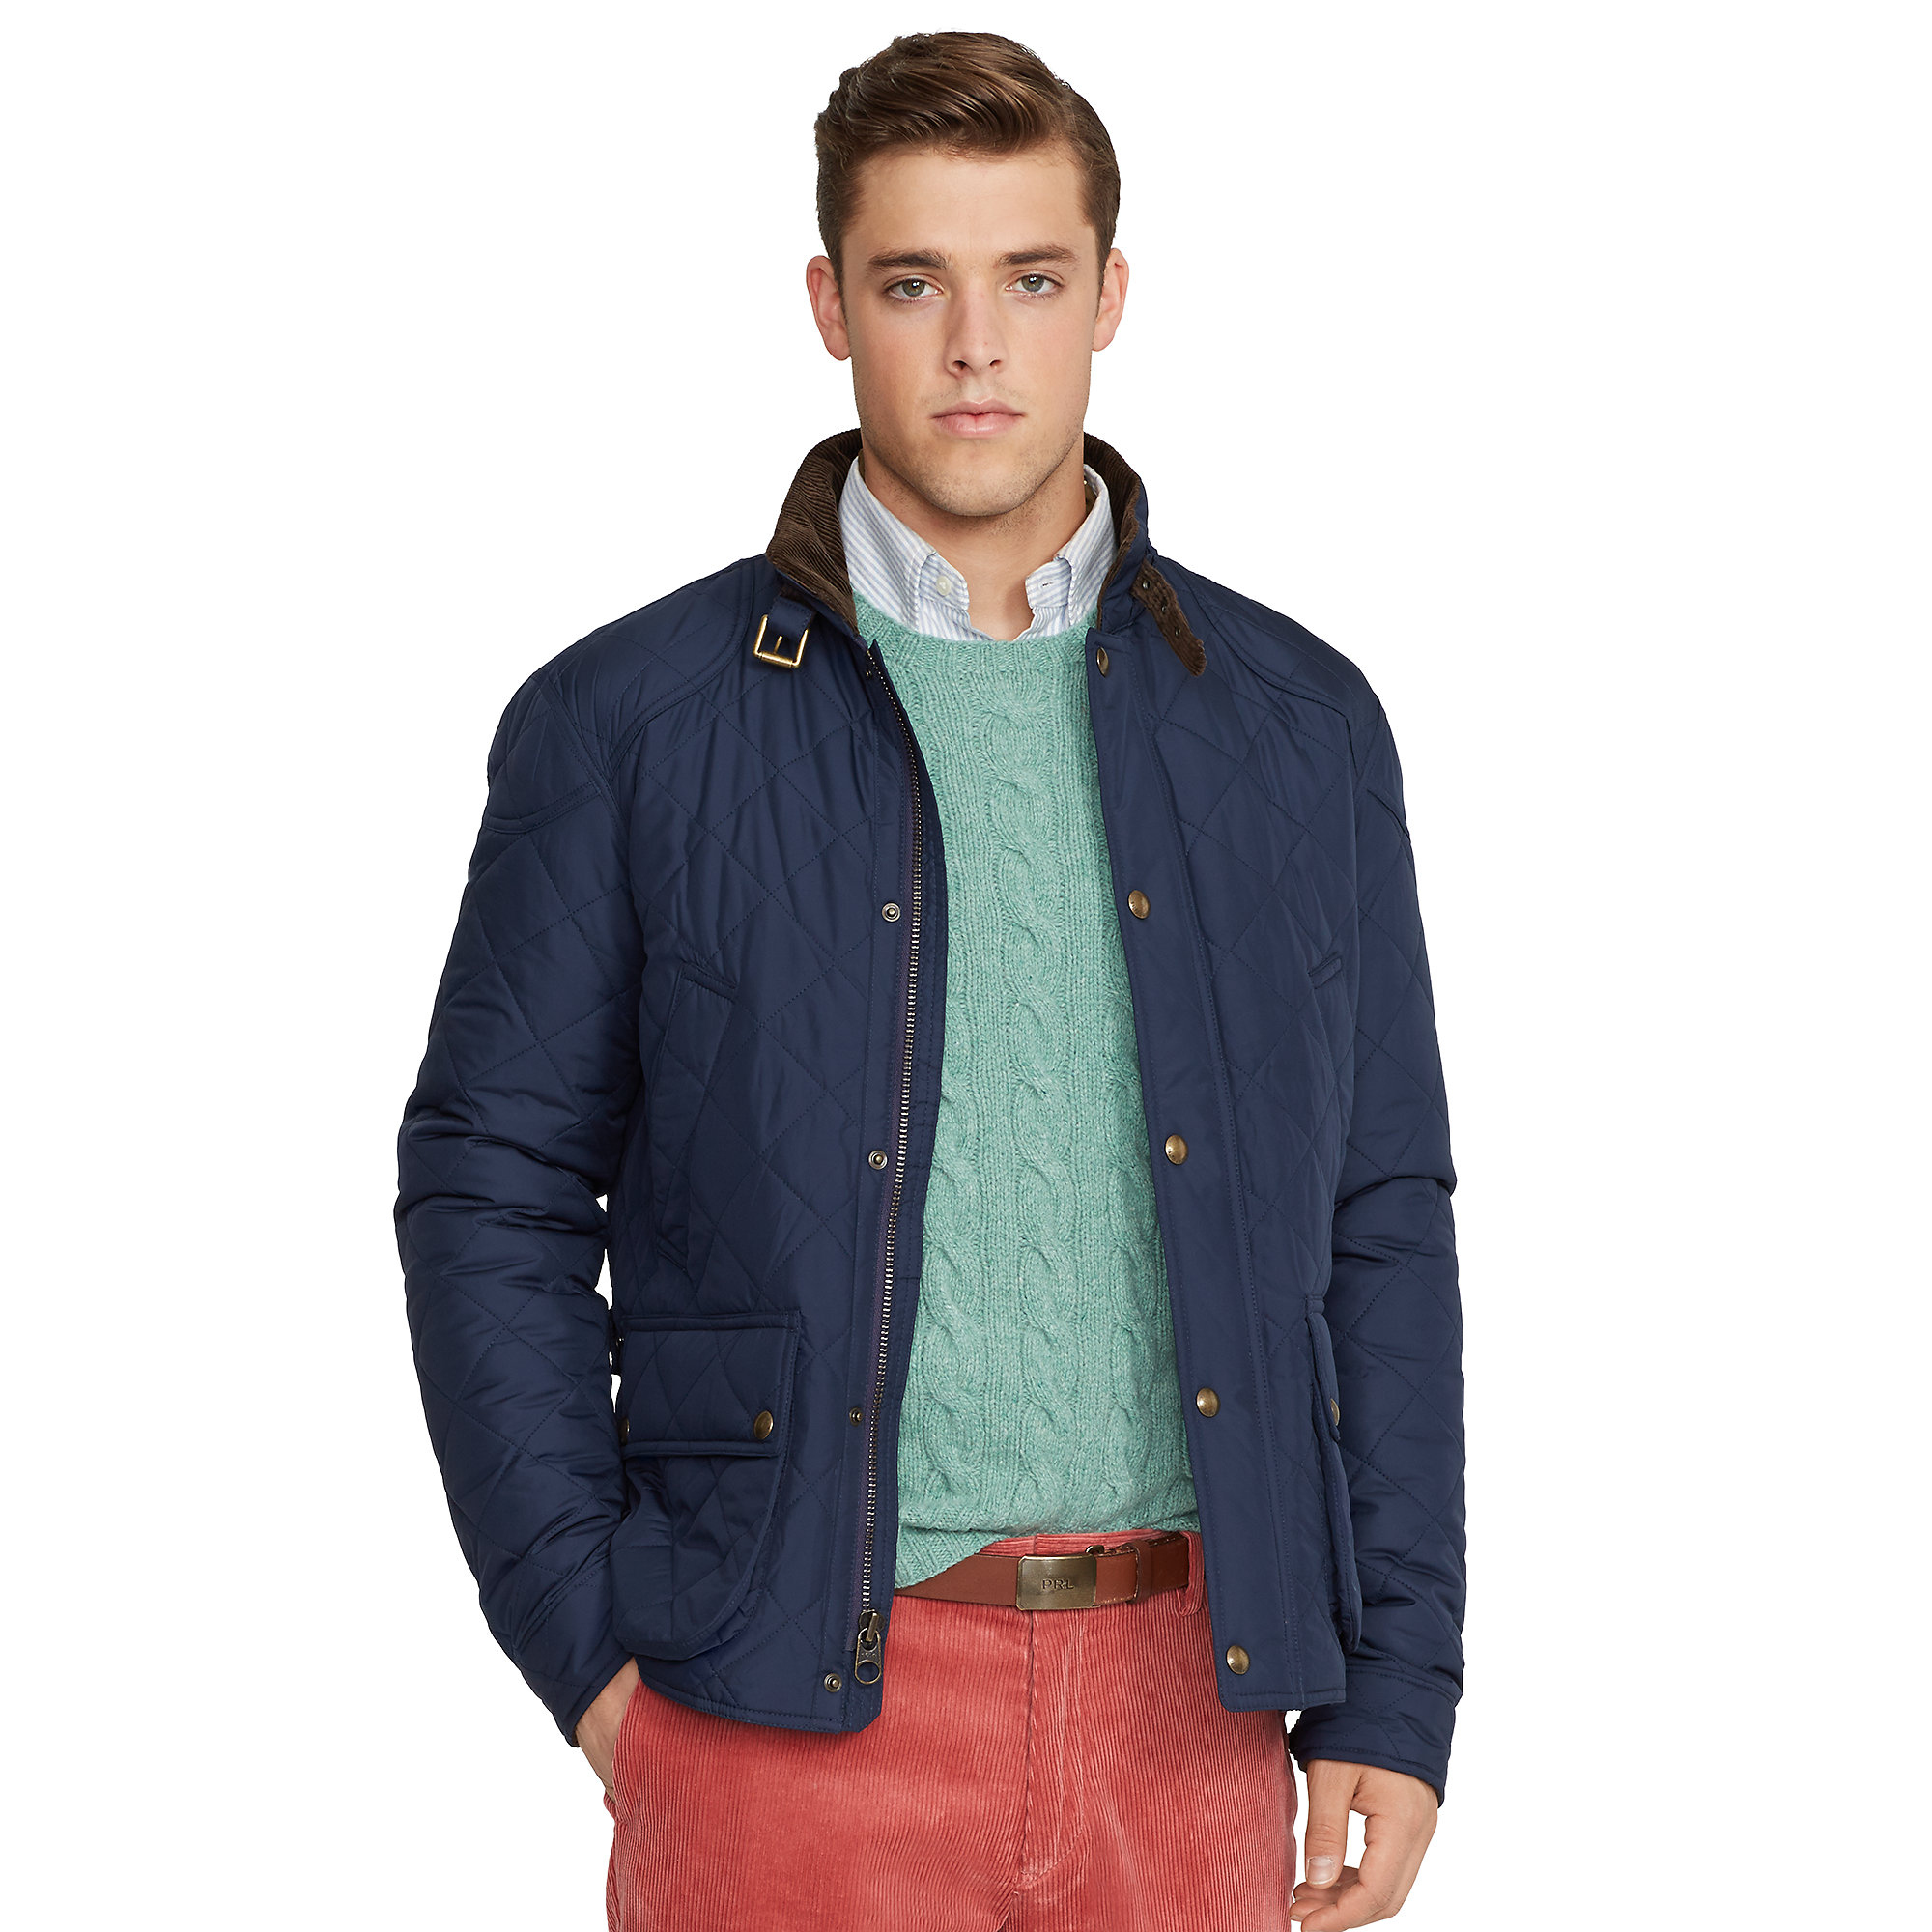 Lyst - Polo Ralph Lauren Cadwell Quilted Bomber Jacket in Blue for Men